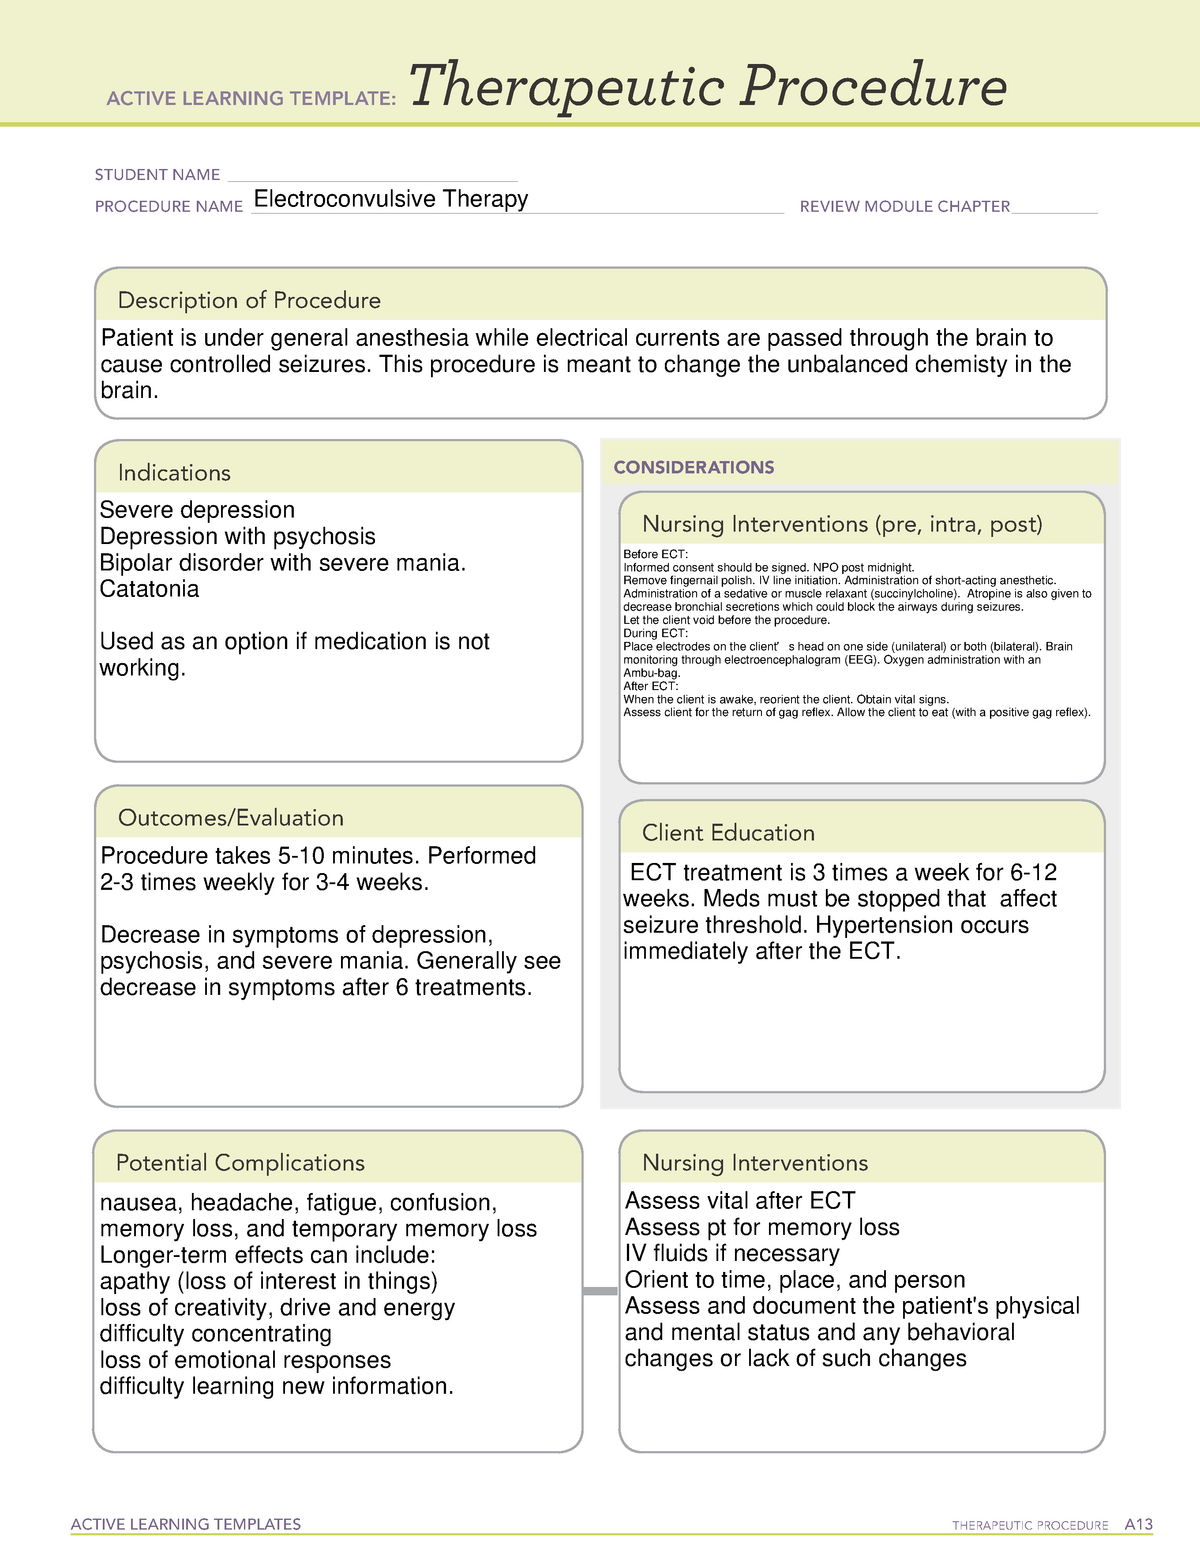 Active Learning Template